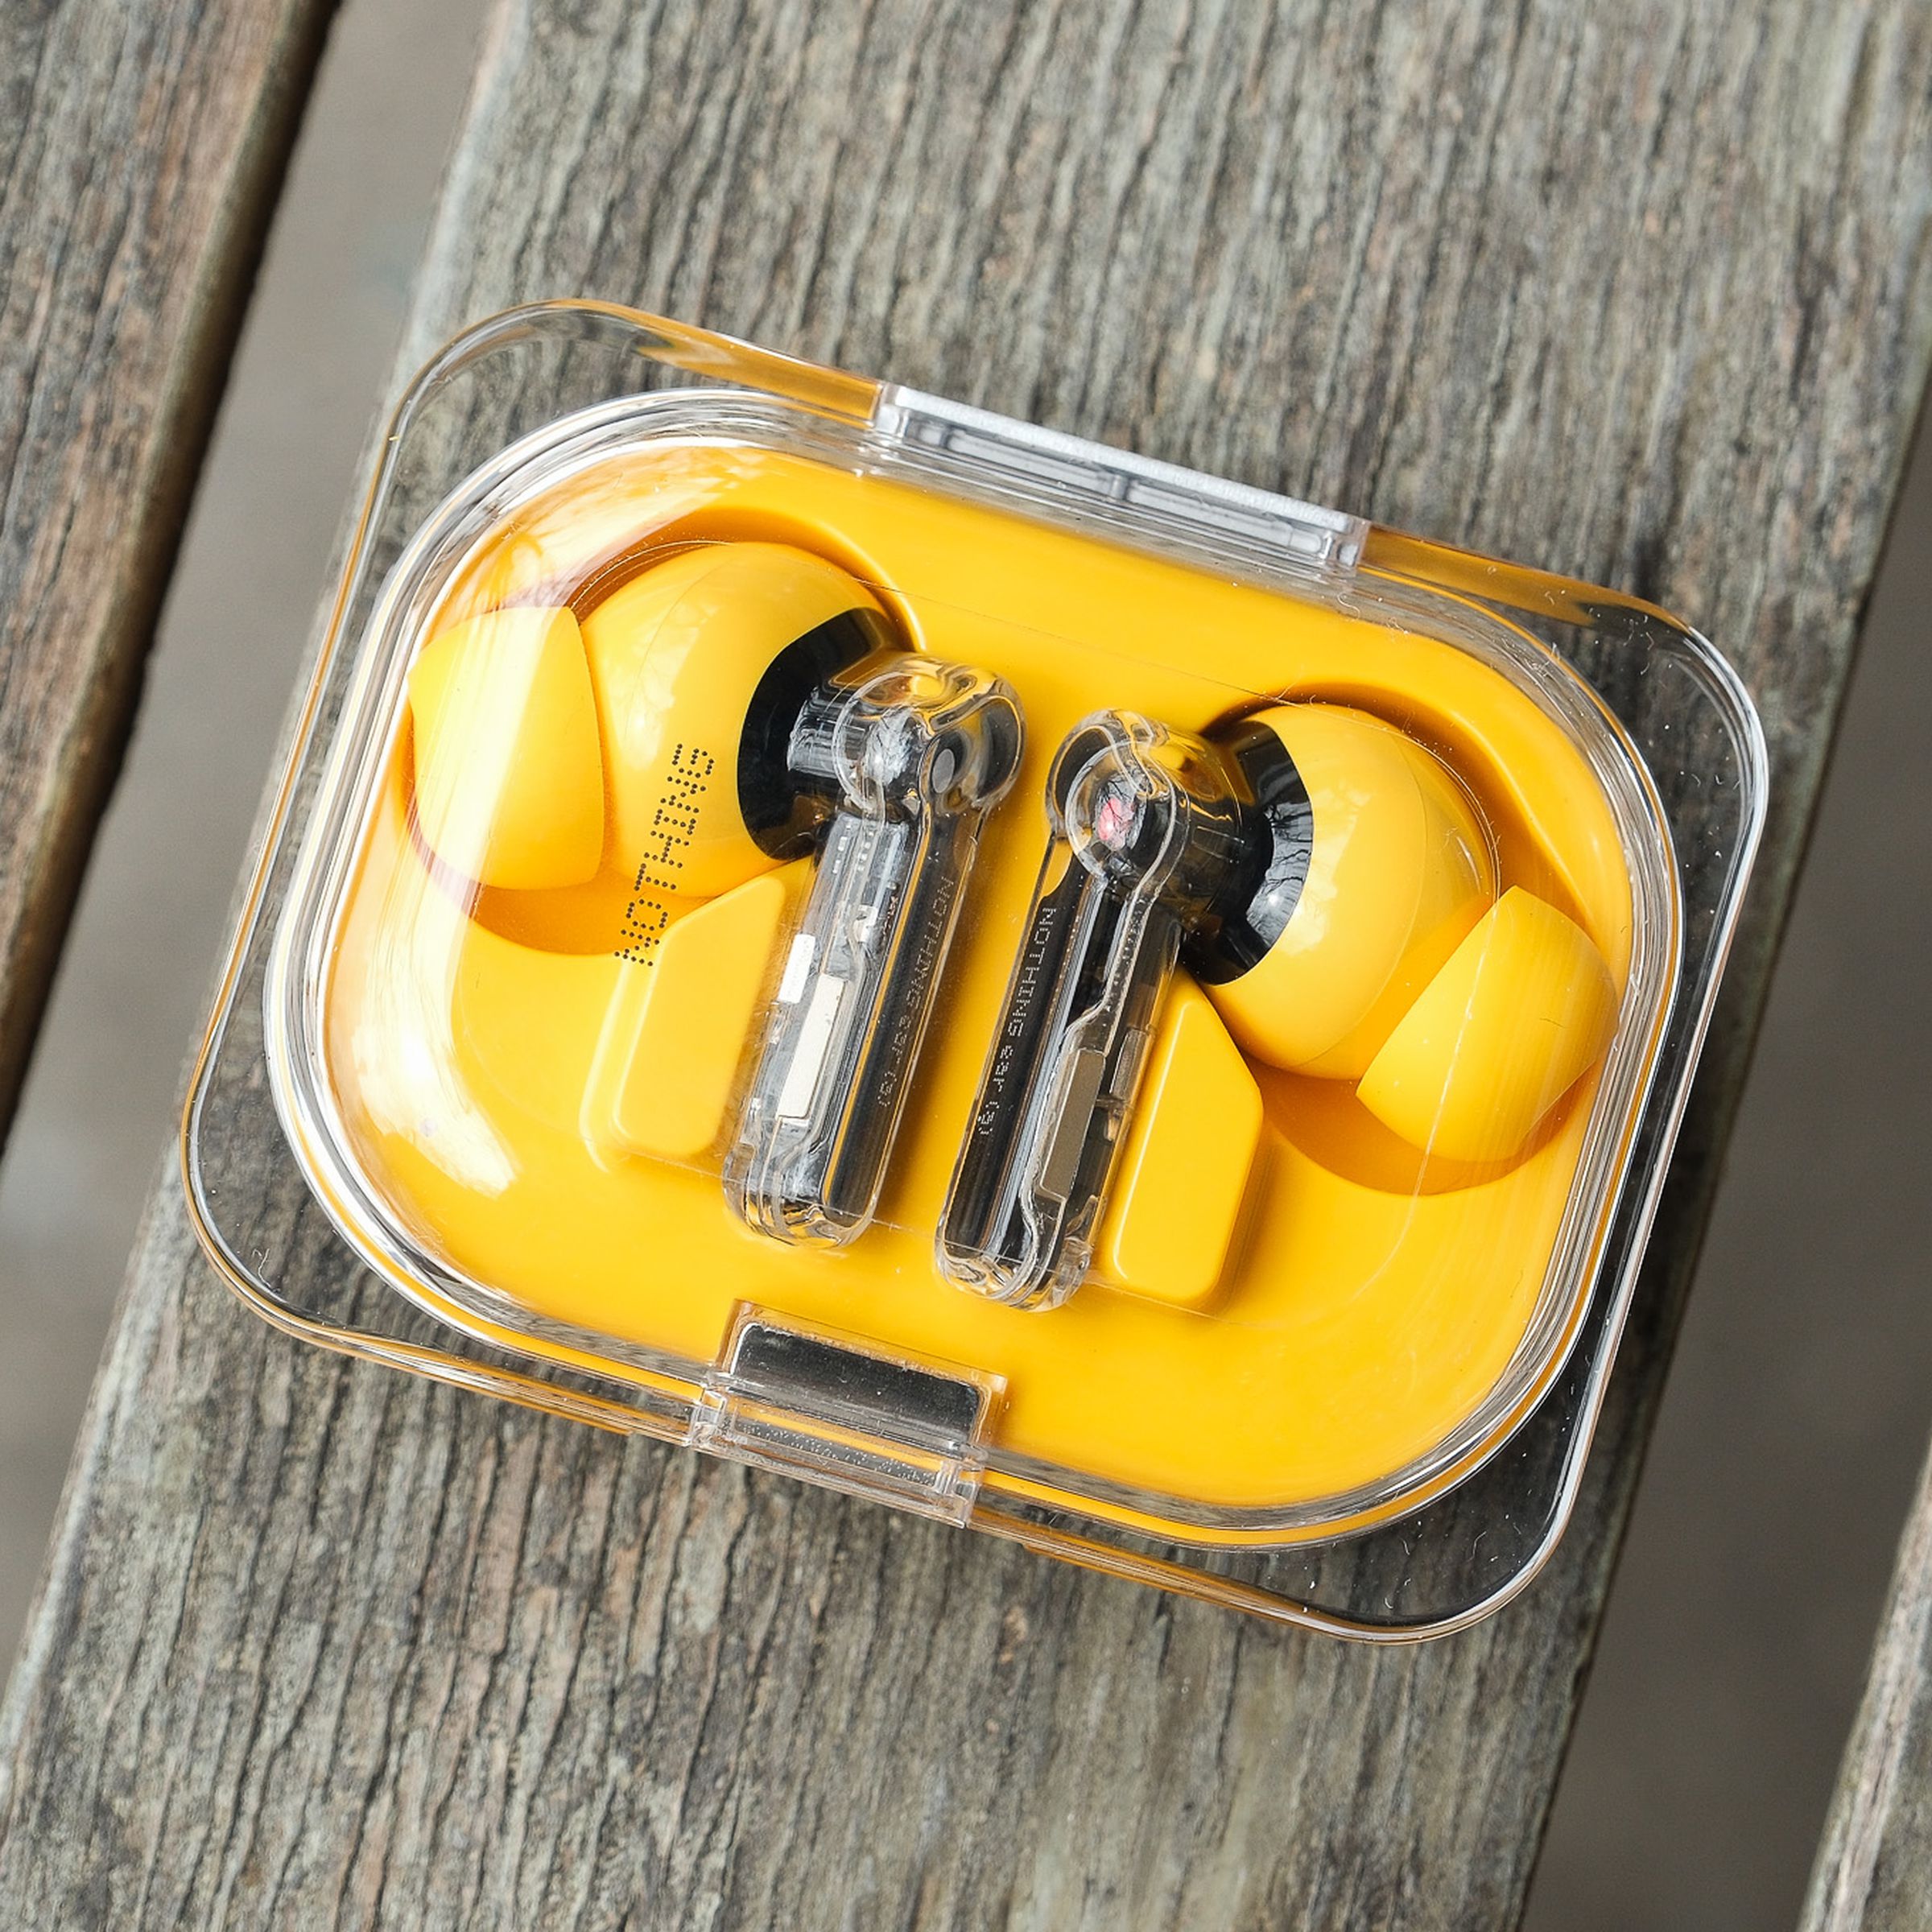 A photo of new earbuds from Nothing.